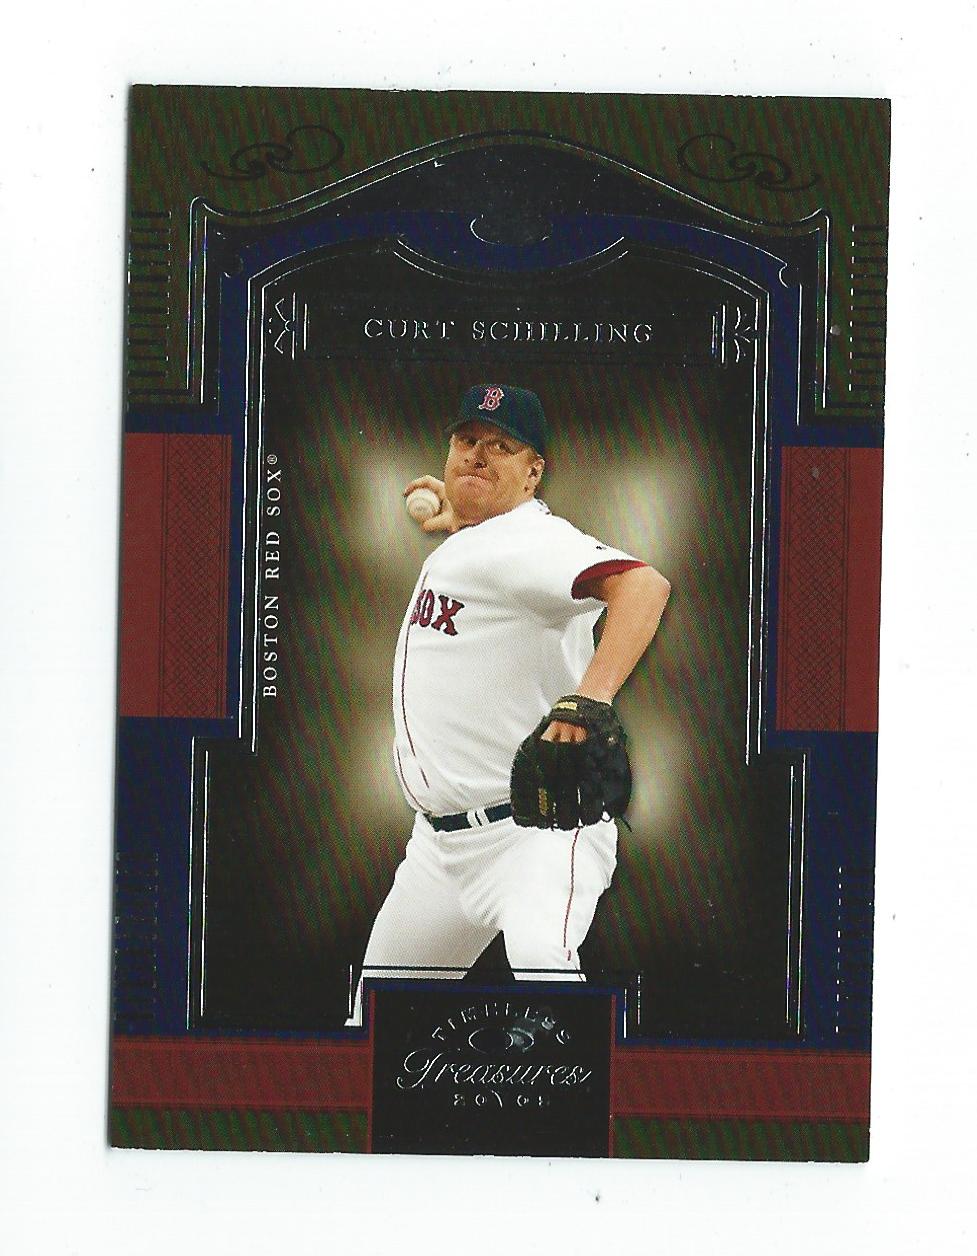 2005 Timeless Treasures #50 Curt Schilling Sox